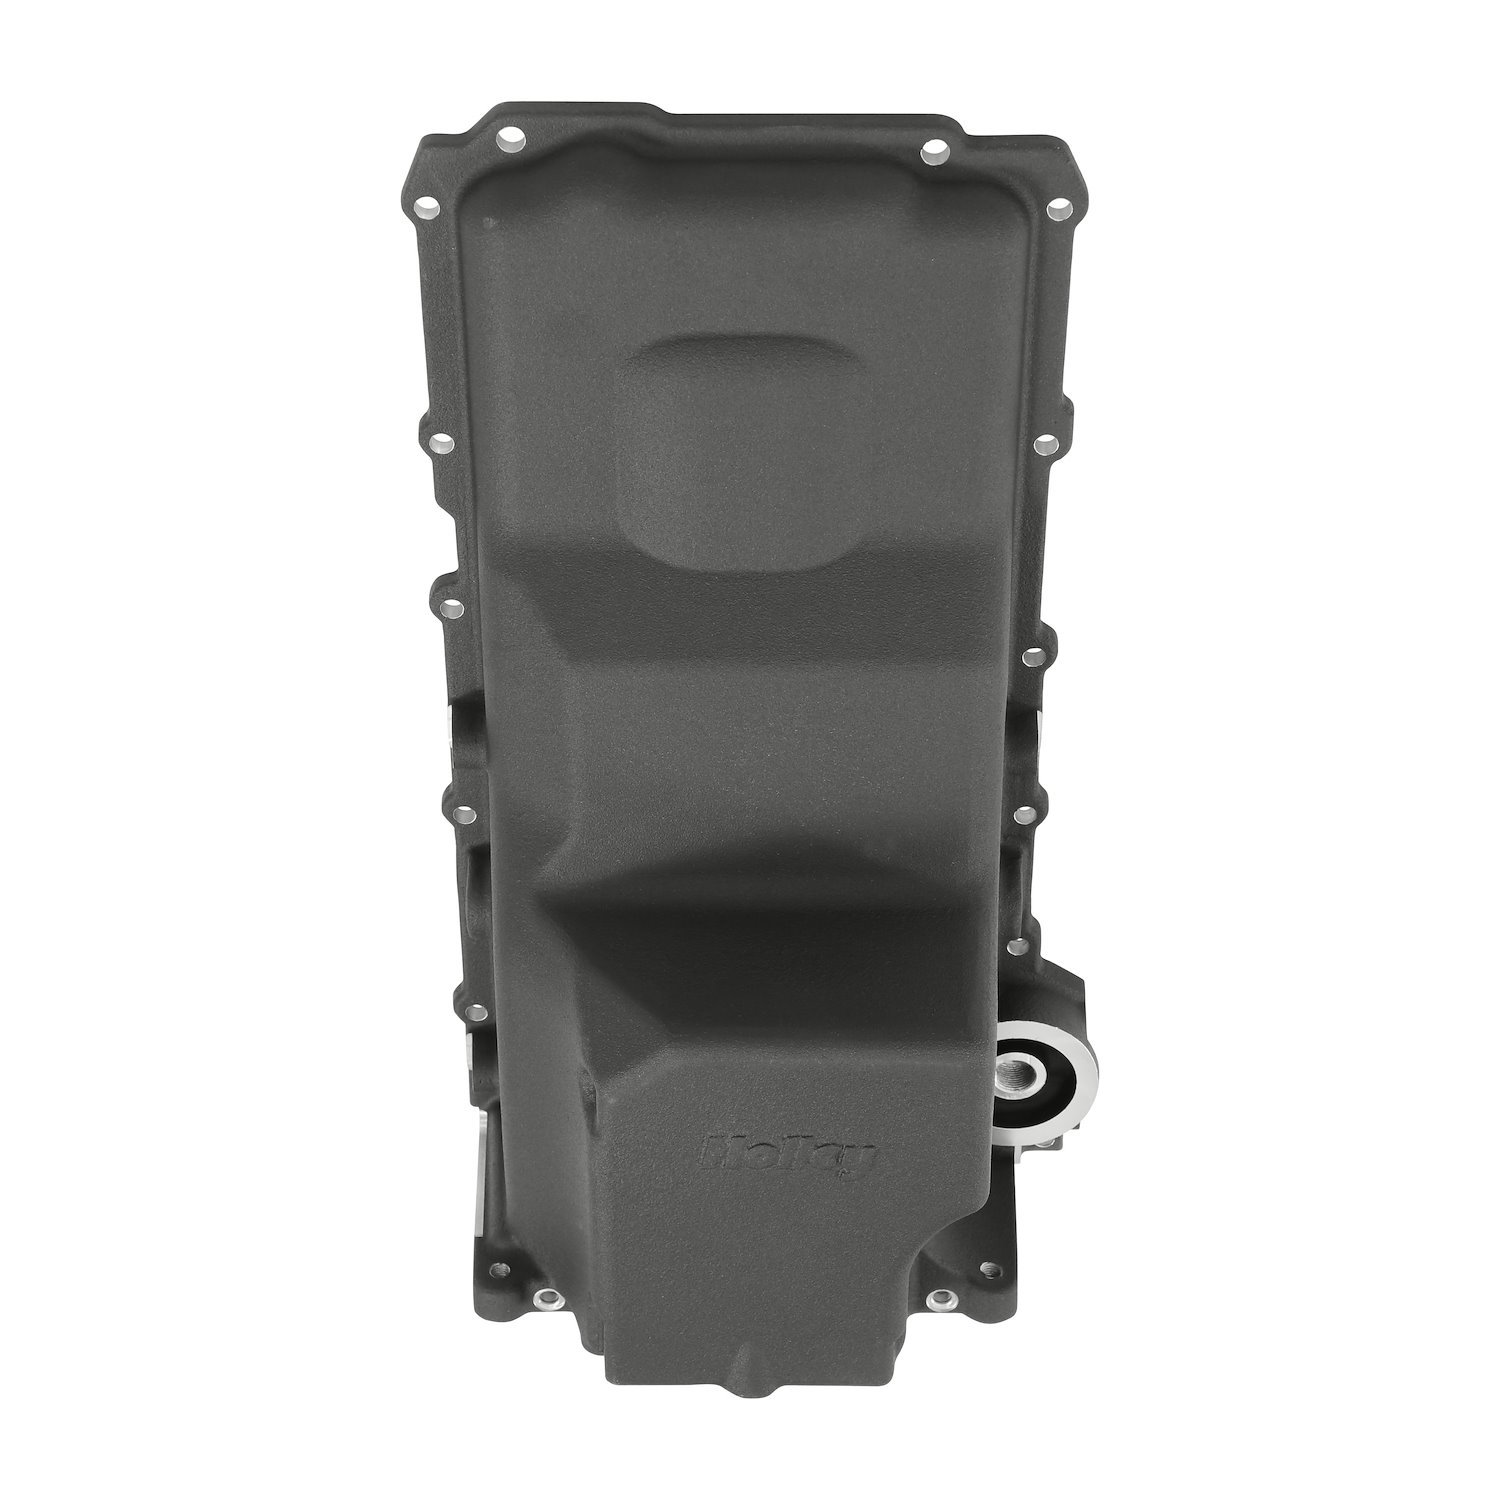 302-4BK GM Gen III/IV LS Engine Swap Oil Pan Kit for 1973-1987 GM 4WD Trucks and Various 4WD Vehicles [Black Finish]